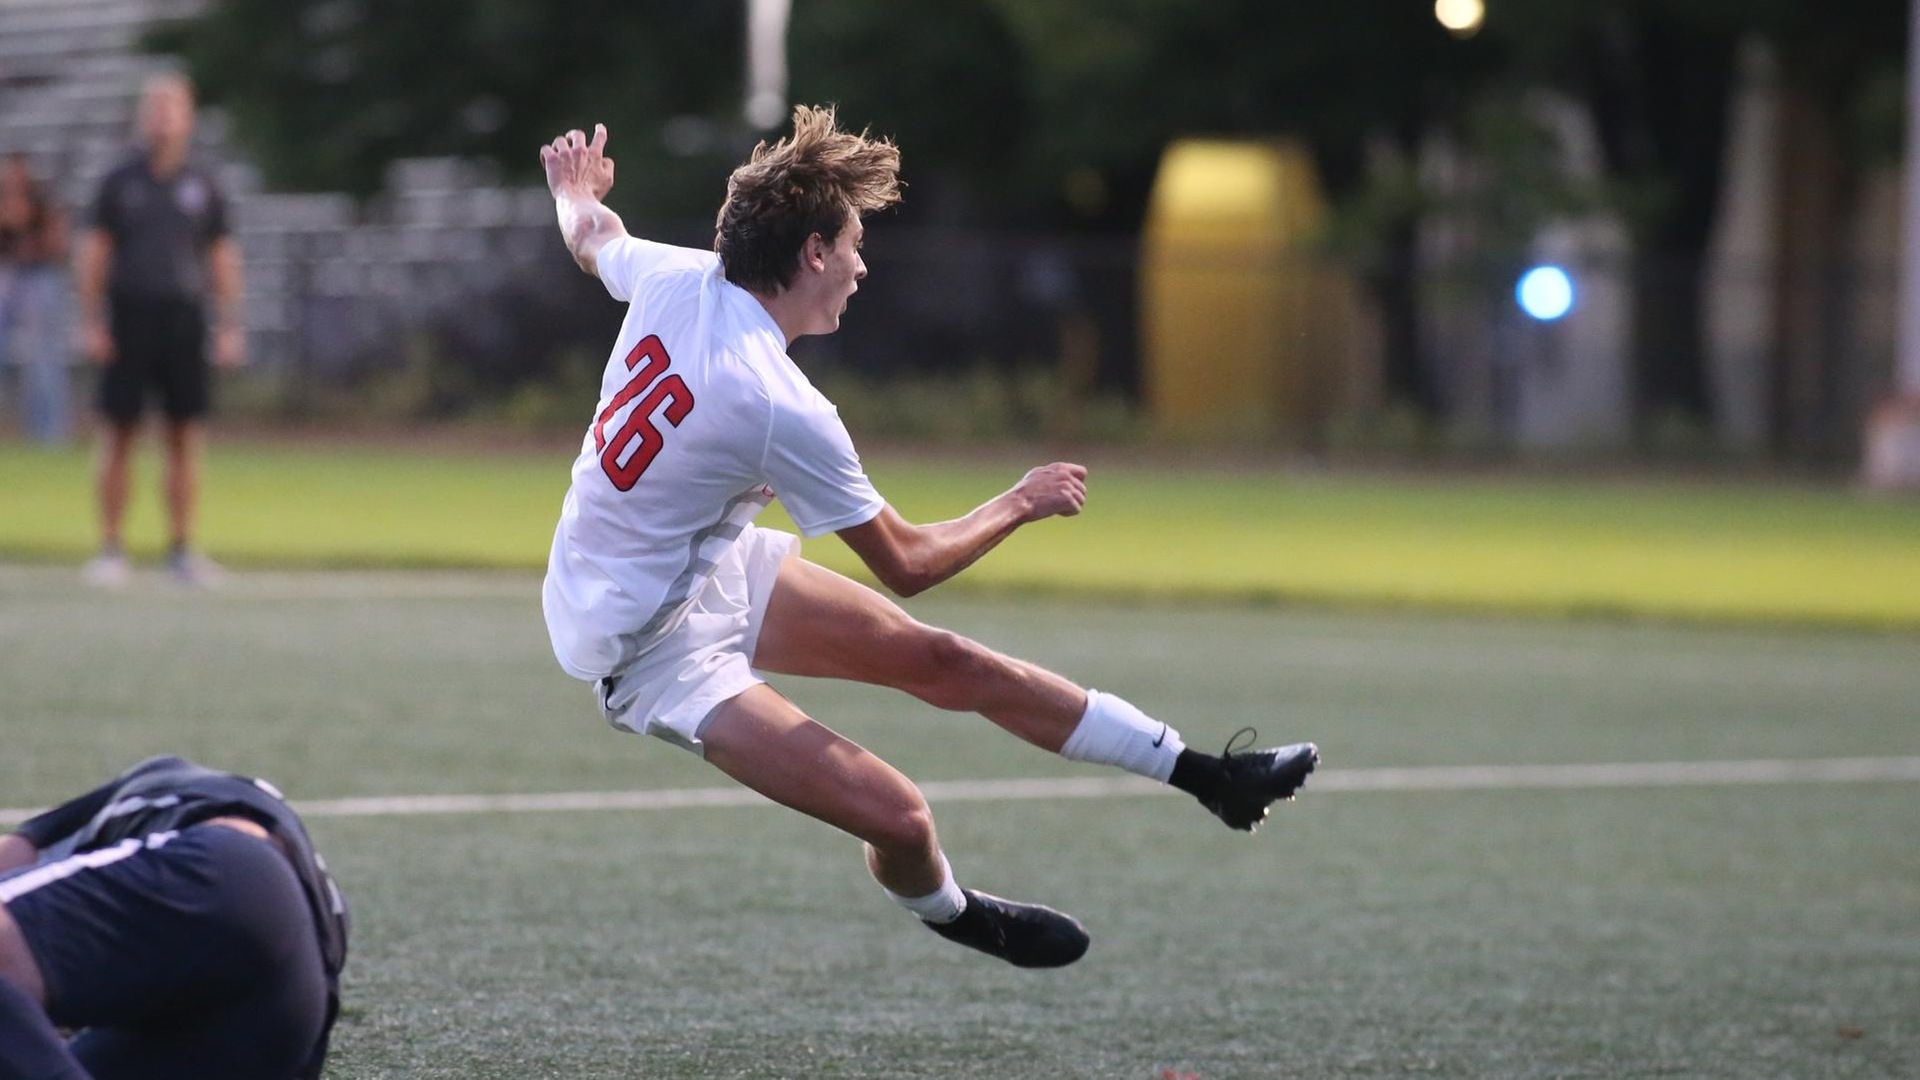 men's soccer player wearing white uniform off the ground after kicking the ball